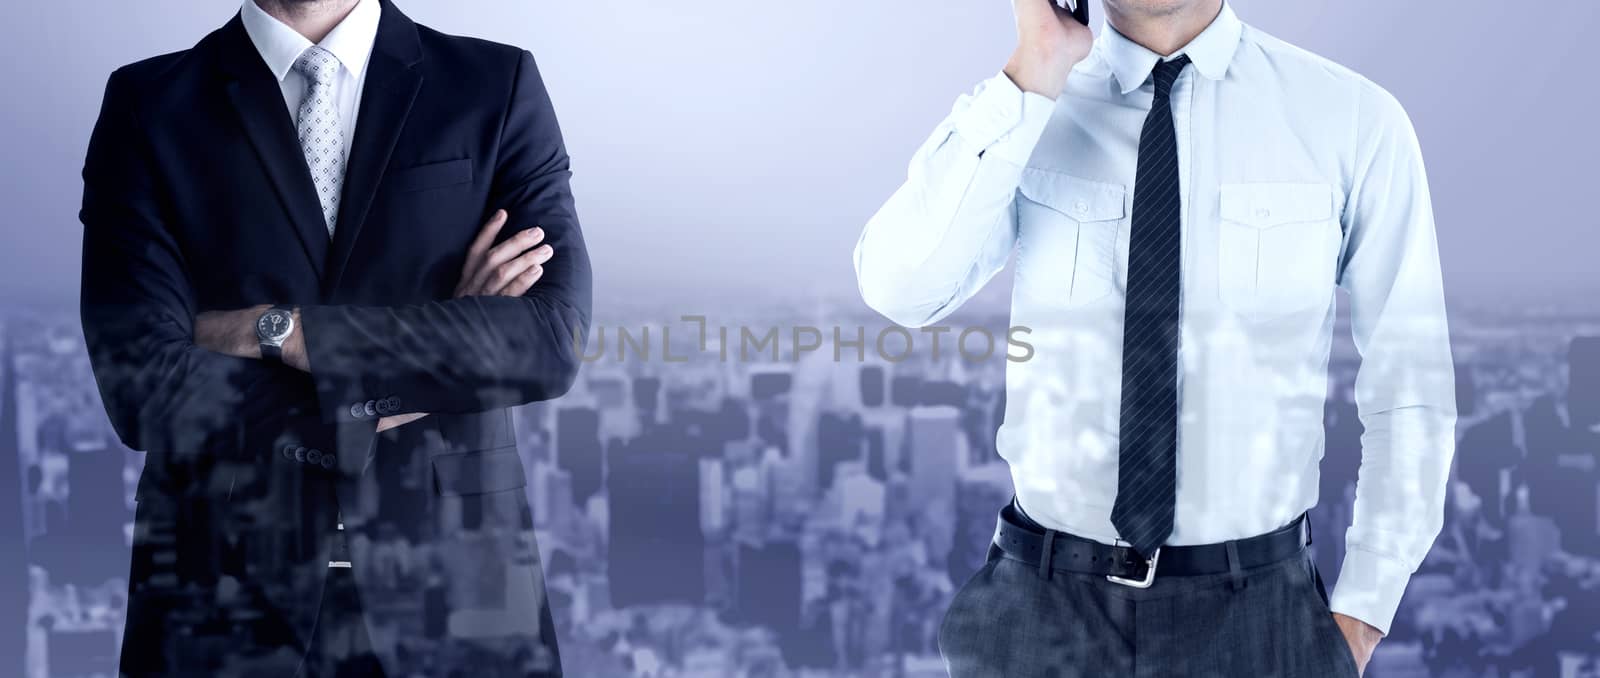 Composite image of businessman on the phone by Wavebreakmedia